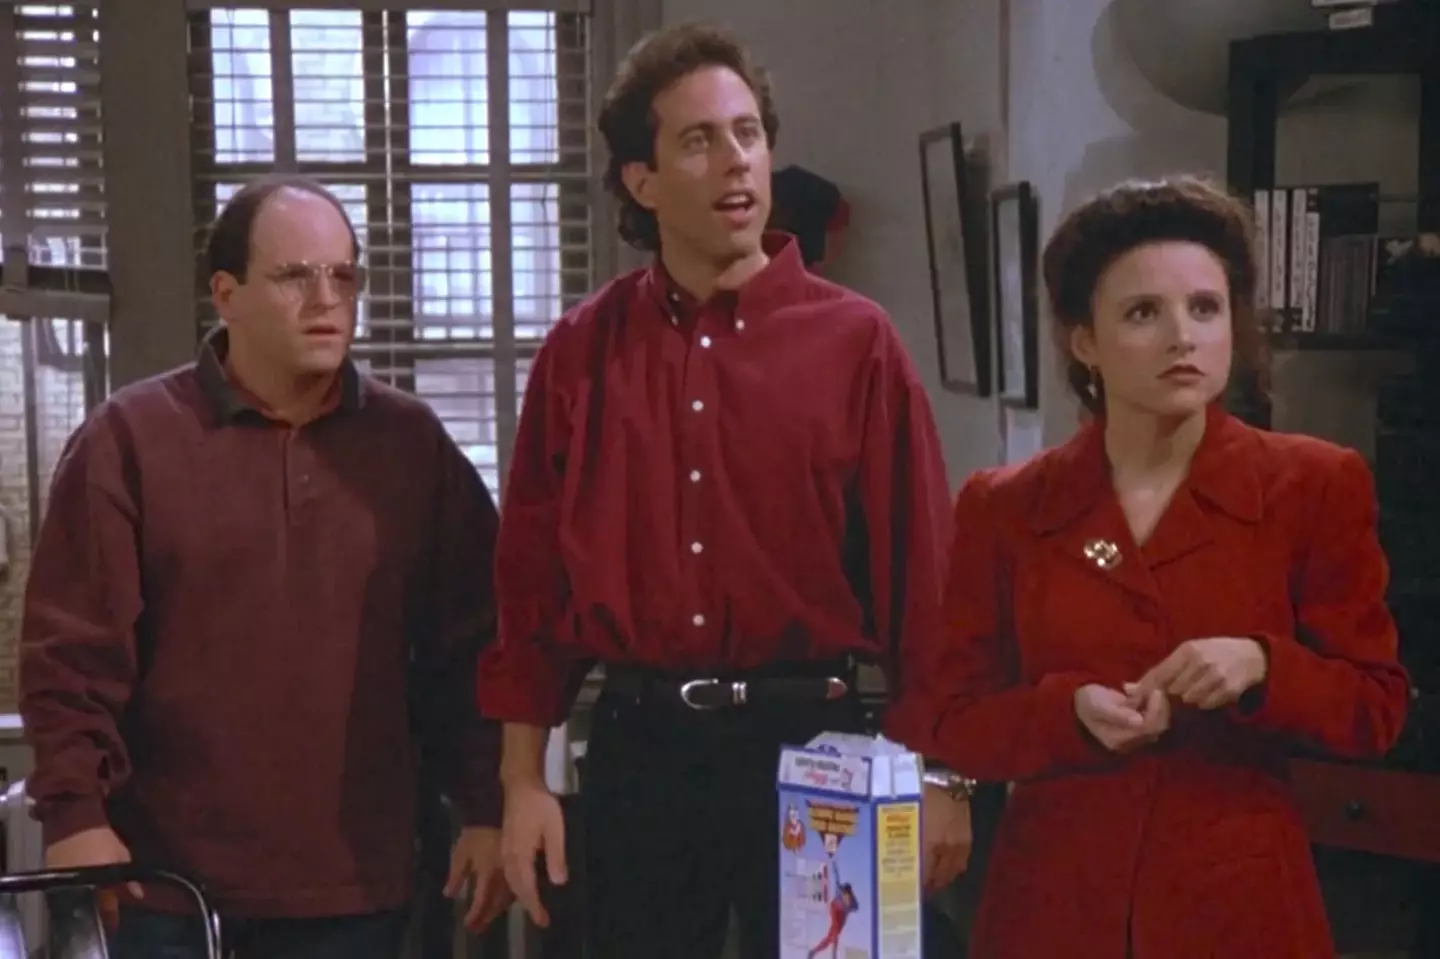 Seinfeld has become one of the most fought over sitcoms.